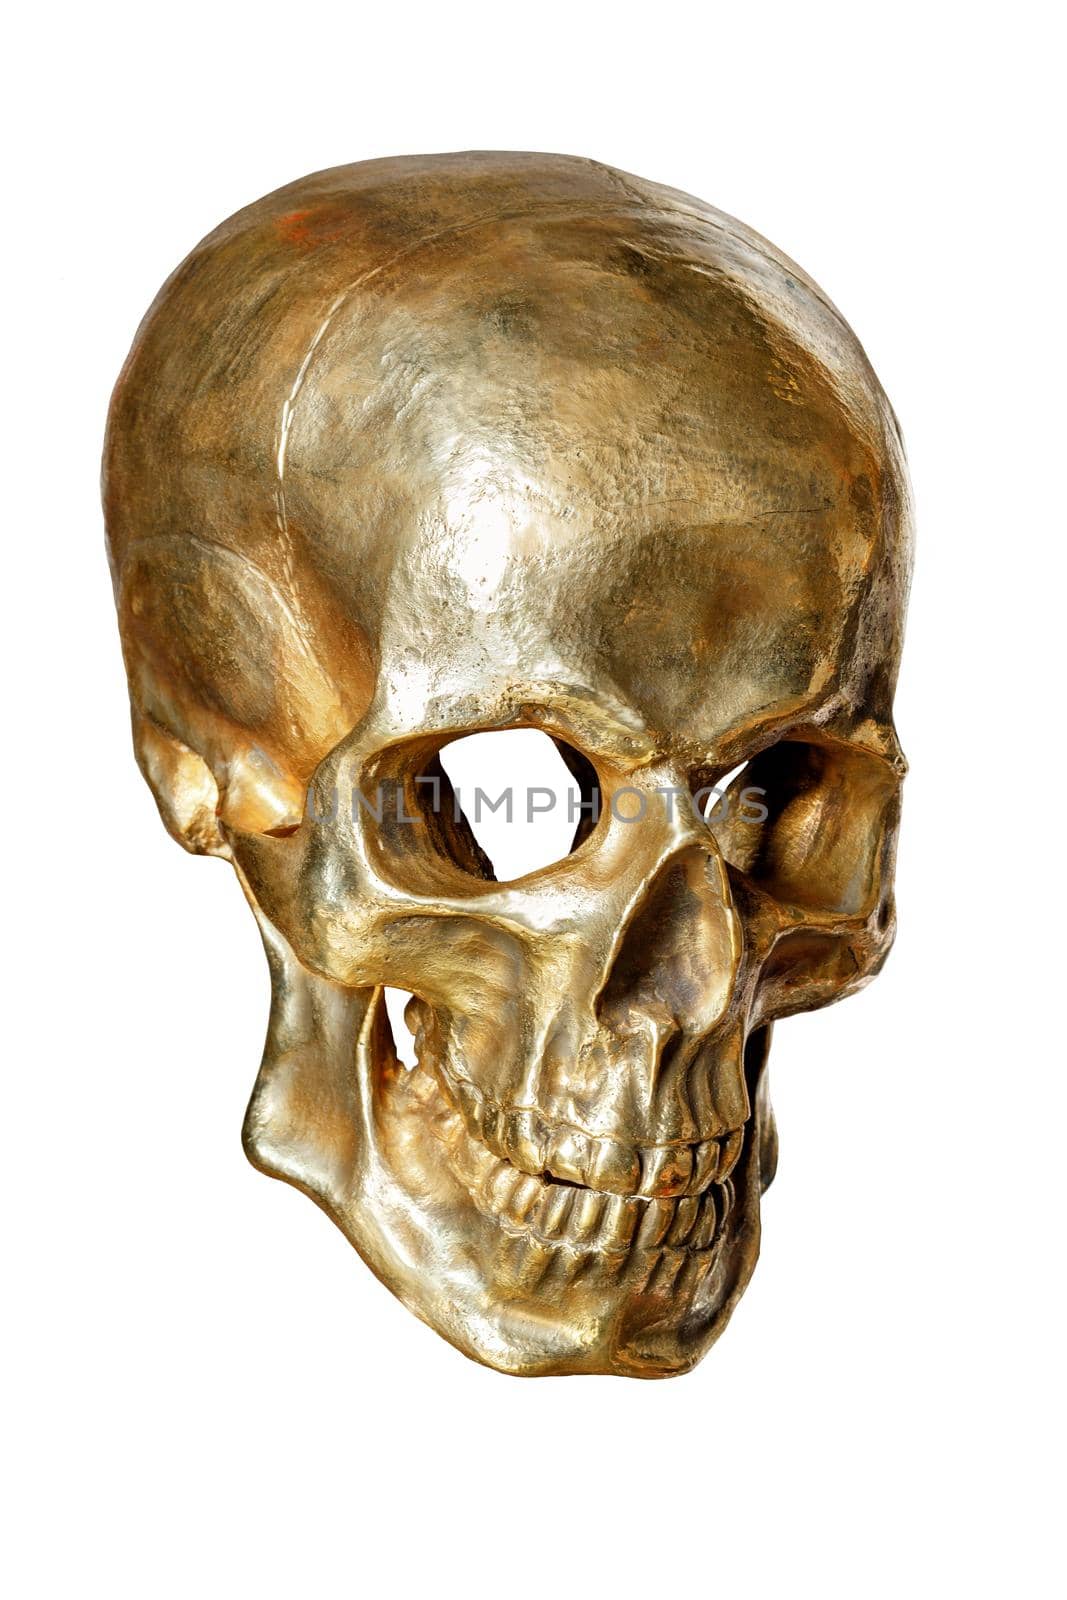 The skeleton of a human skull is painted with gold paint, isolated on a white background, close-up.